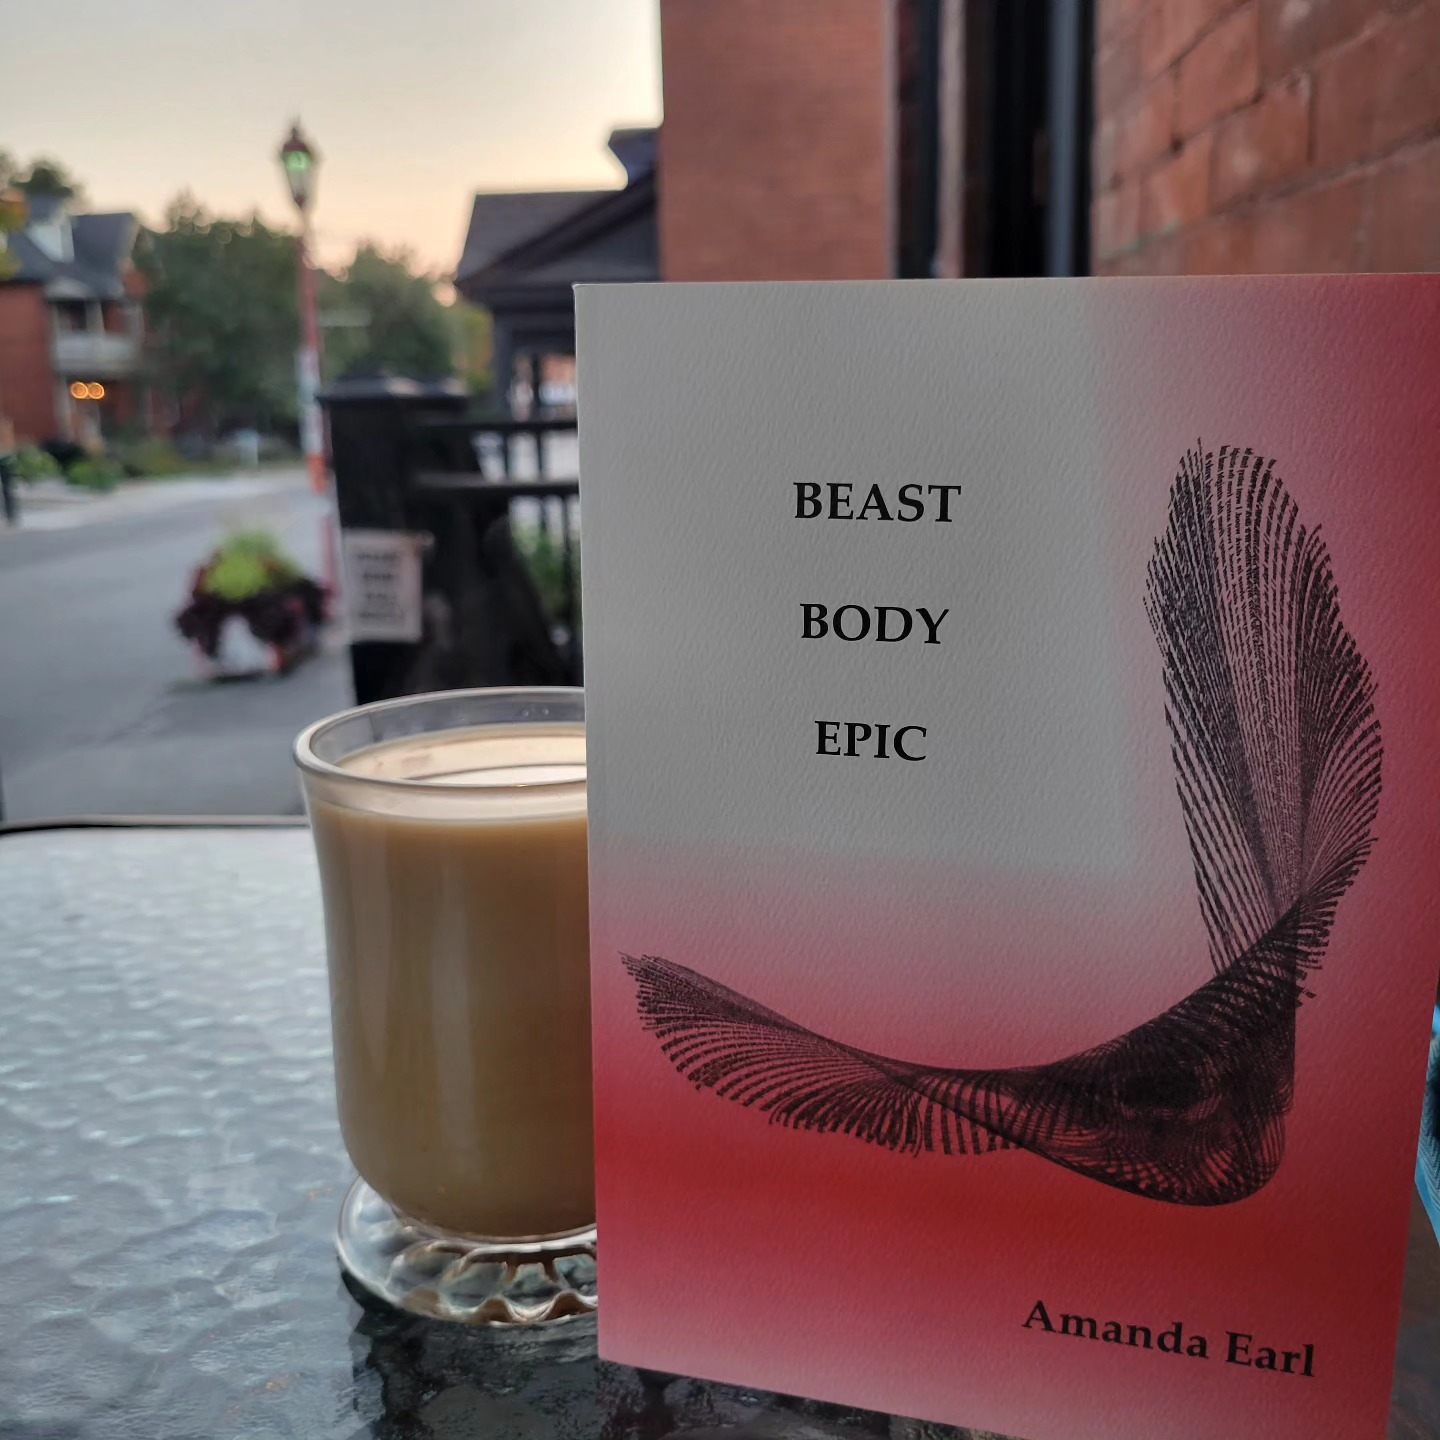 red and white book with text: Beast Body Epic / Amanda Earl and visual poem beside a cup of coffee outside on a patio, blurred background